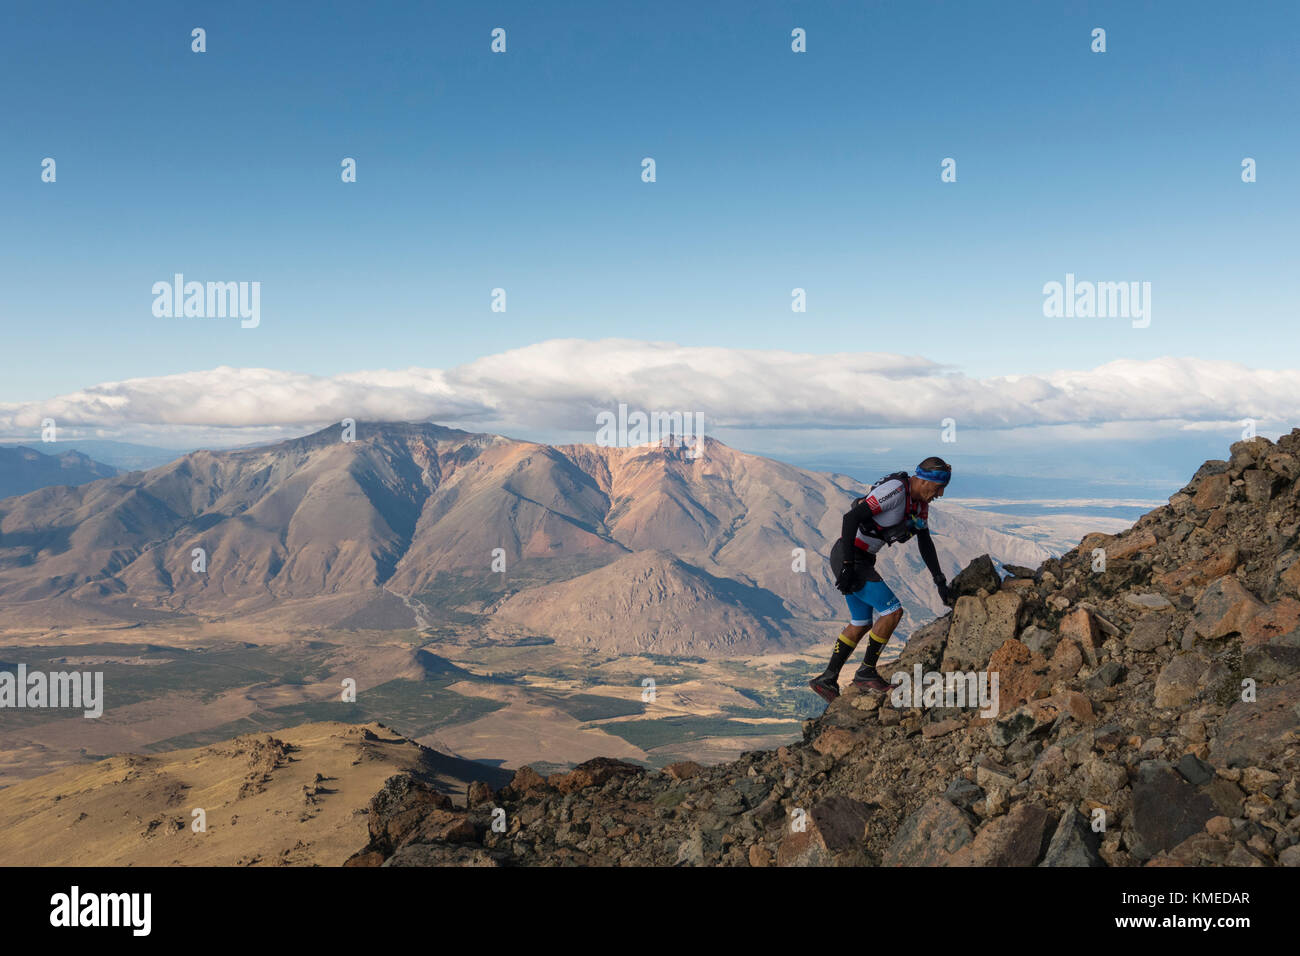 Man climbing rocky mountain against clouds and sky, Esquel, Chubut, Argentina Stock Photo